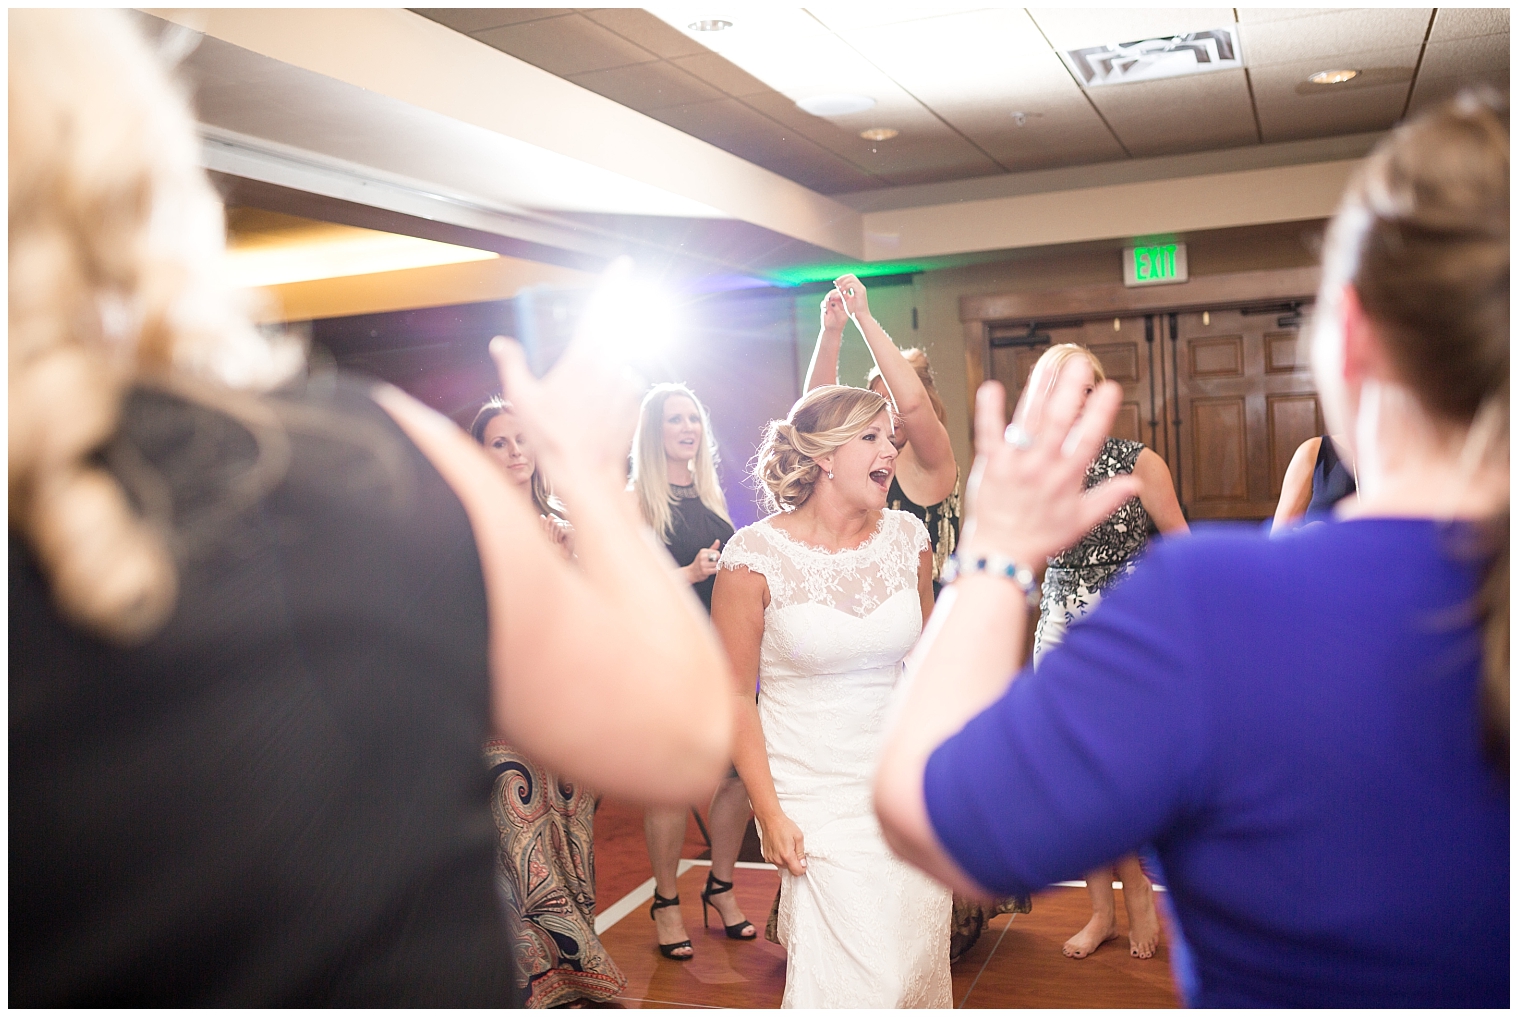 Bride dances with her guests at her Mountain Thunder Lodge wedding reception.